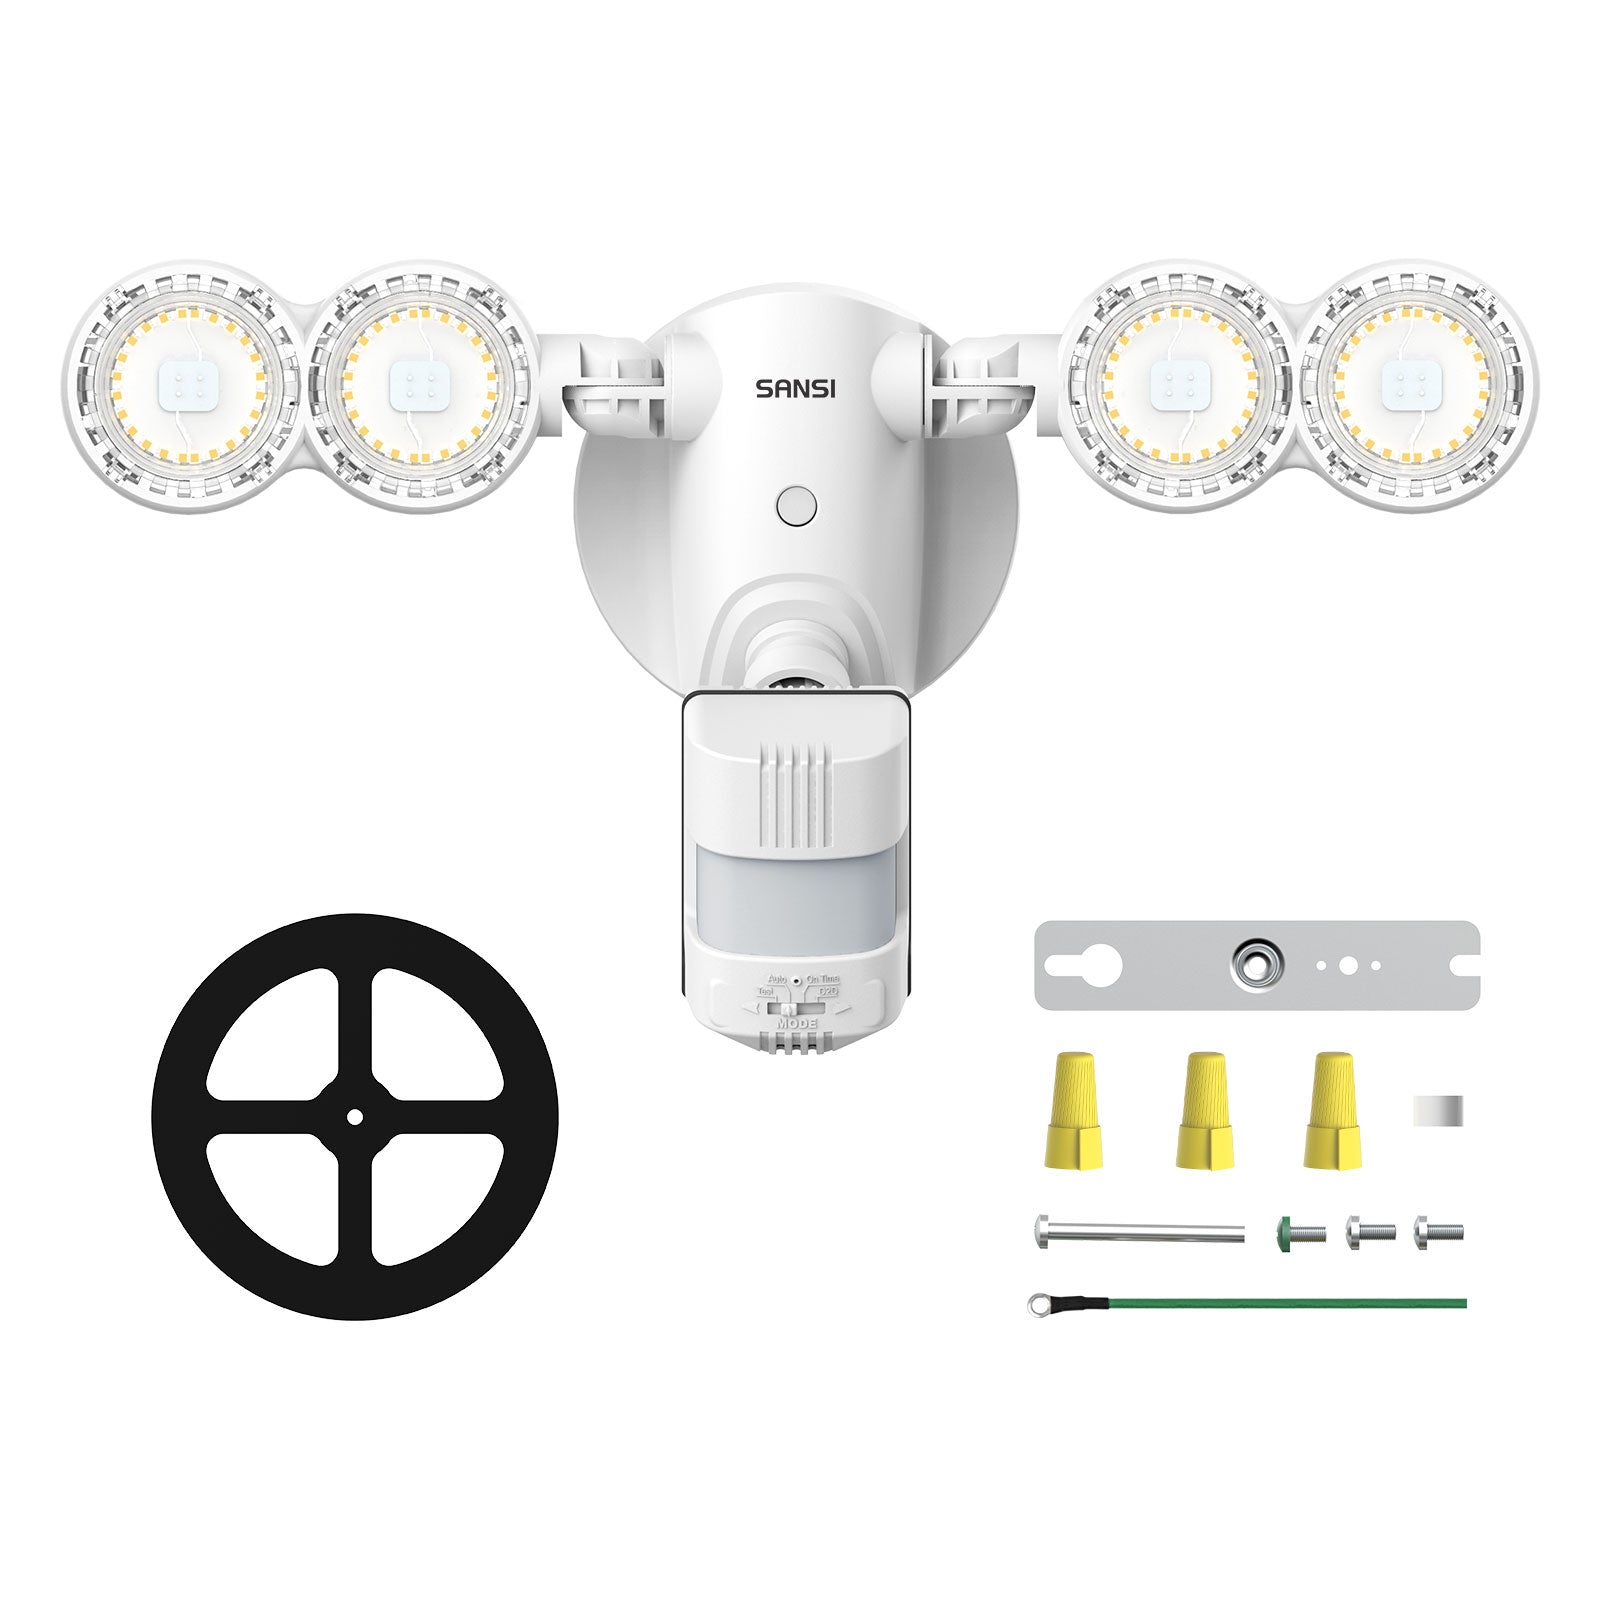 30W LED Security Light with the function of Motion Sensor